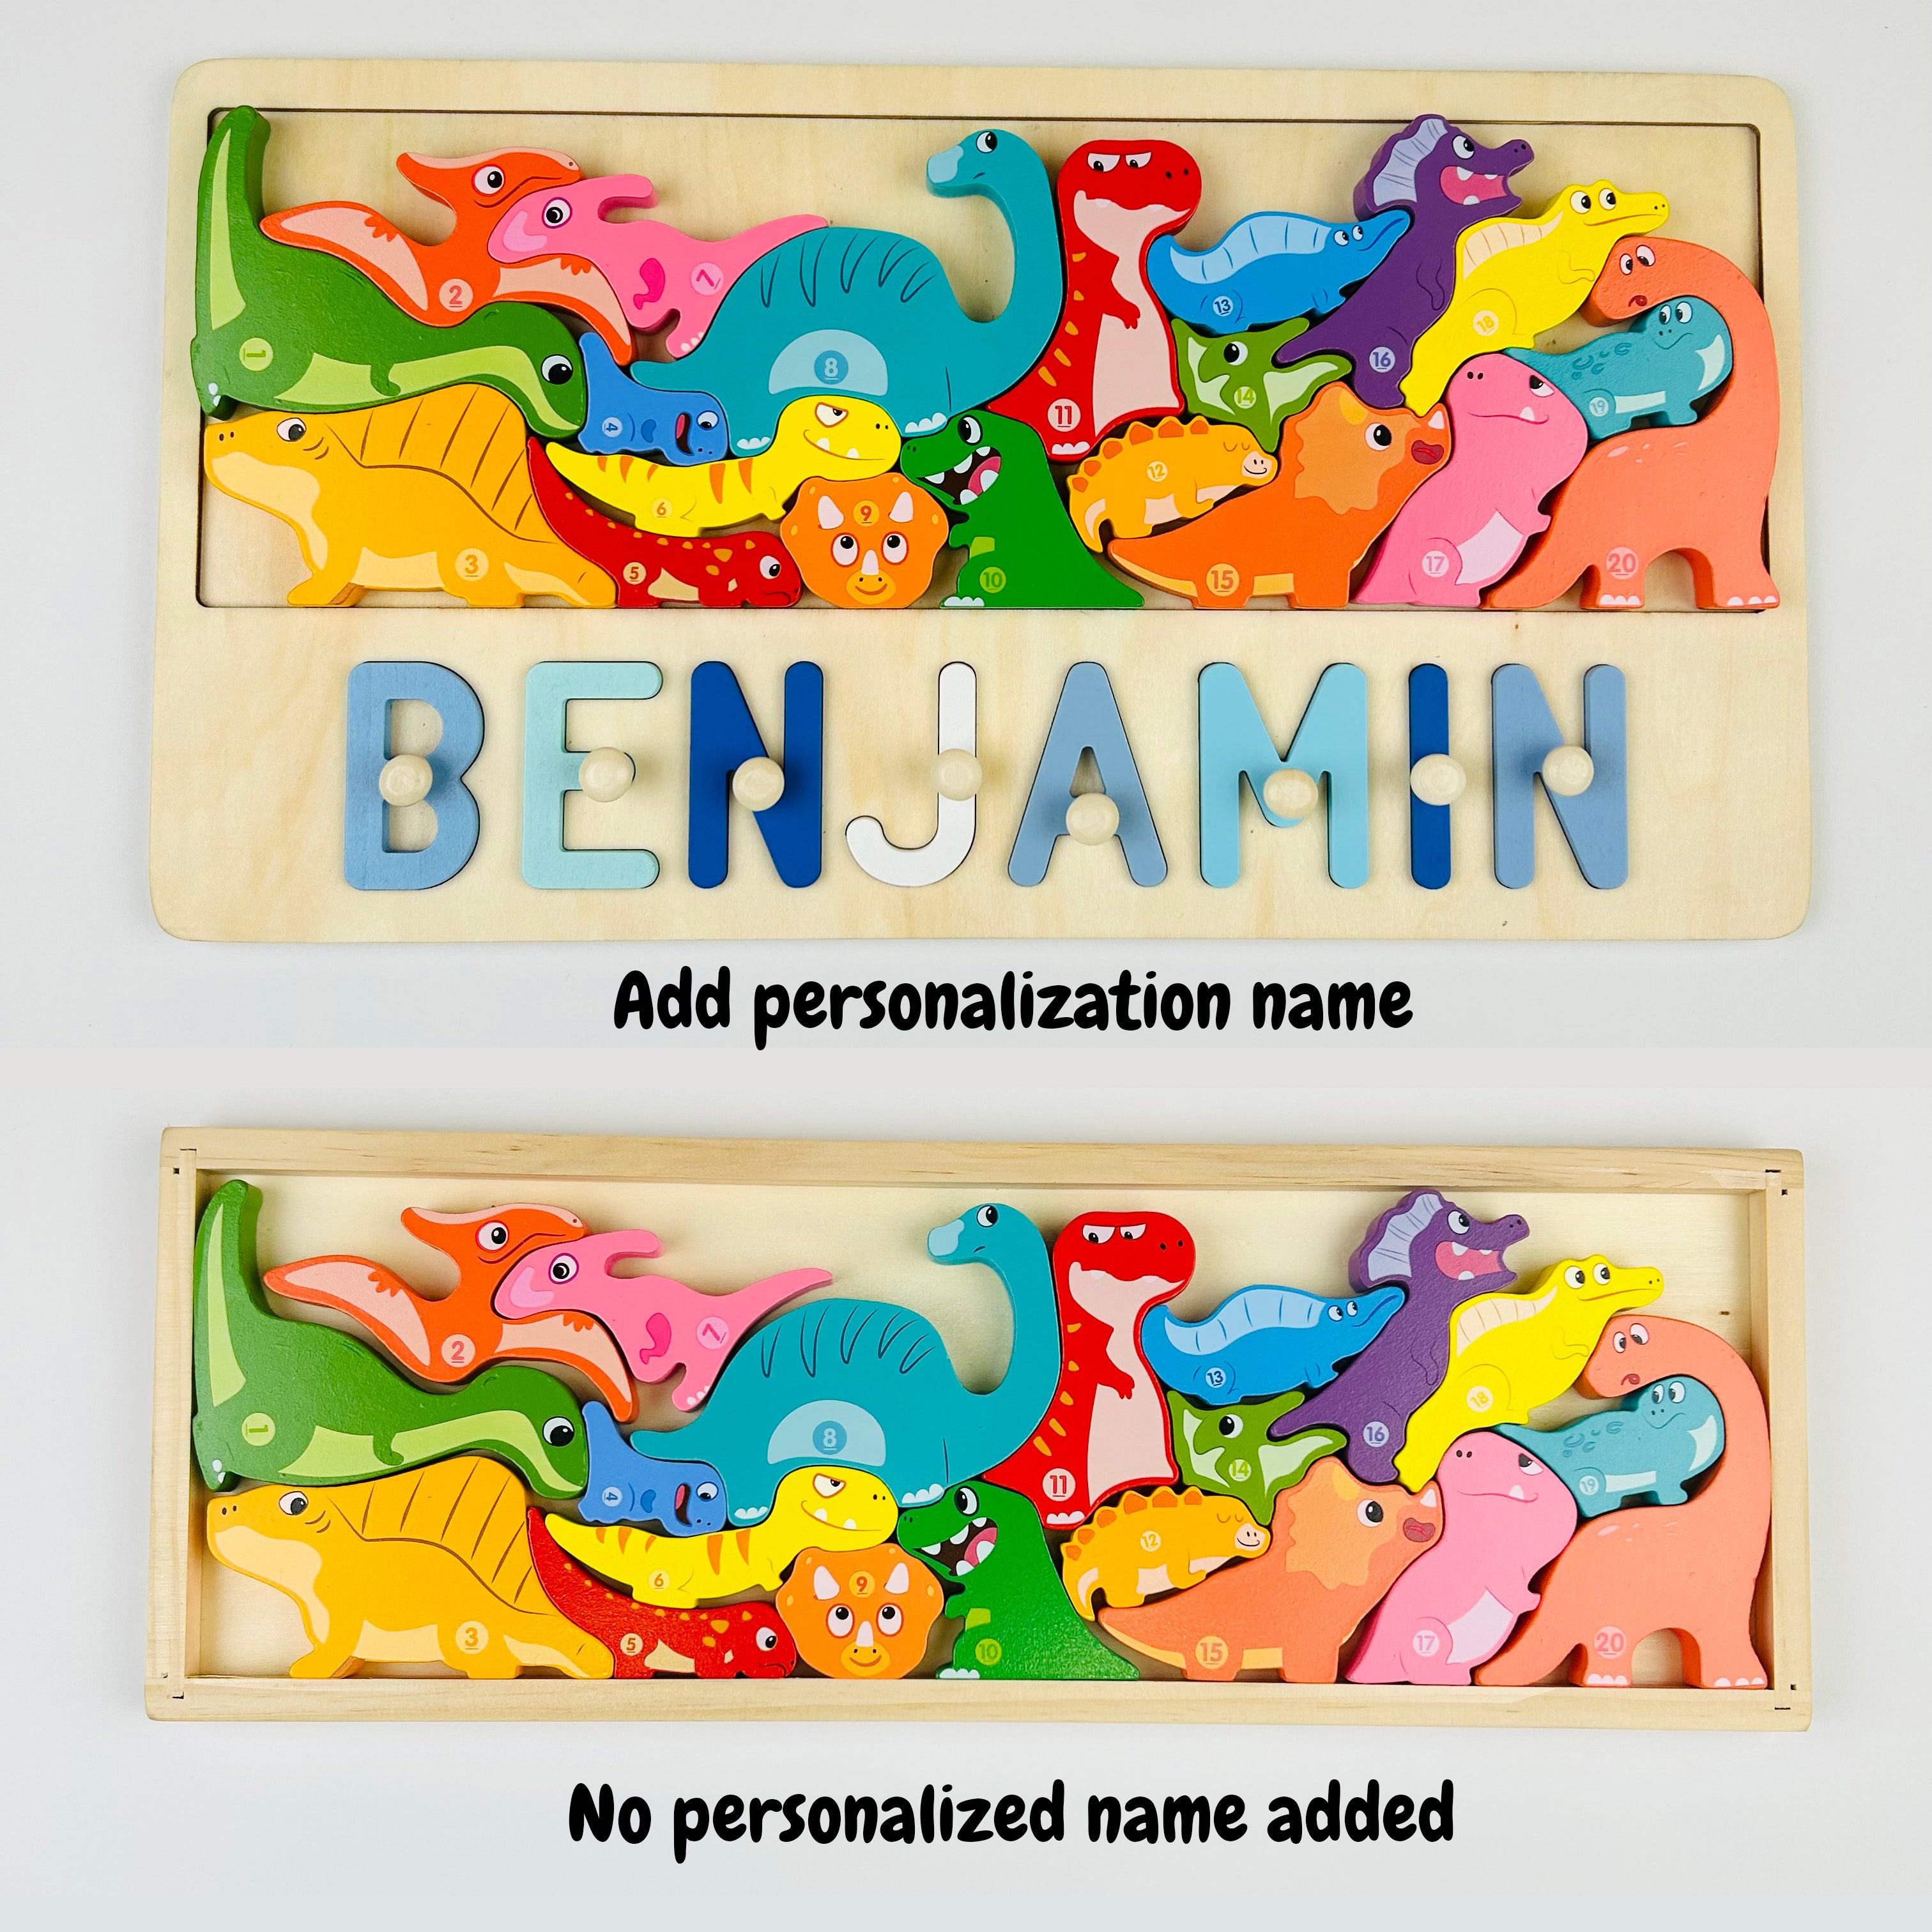 Personalized Wooden Stacking Matching Puzzle With Customized Name